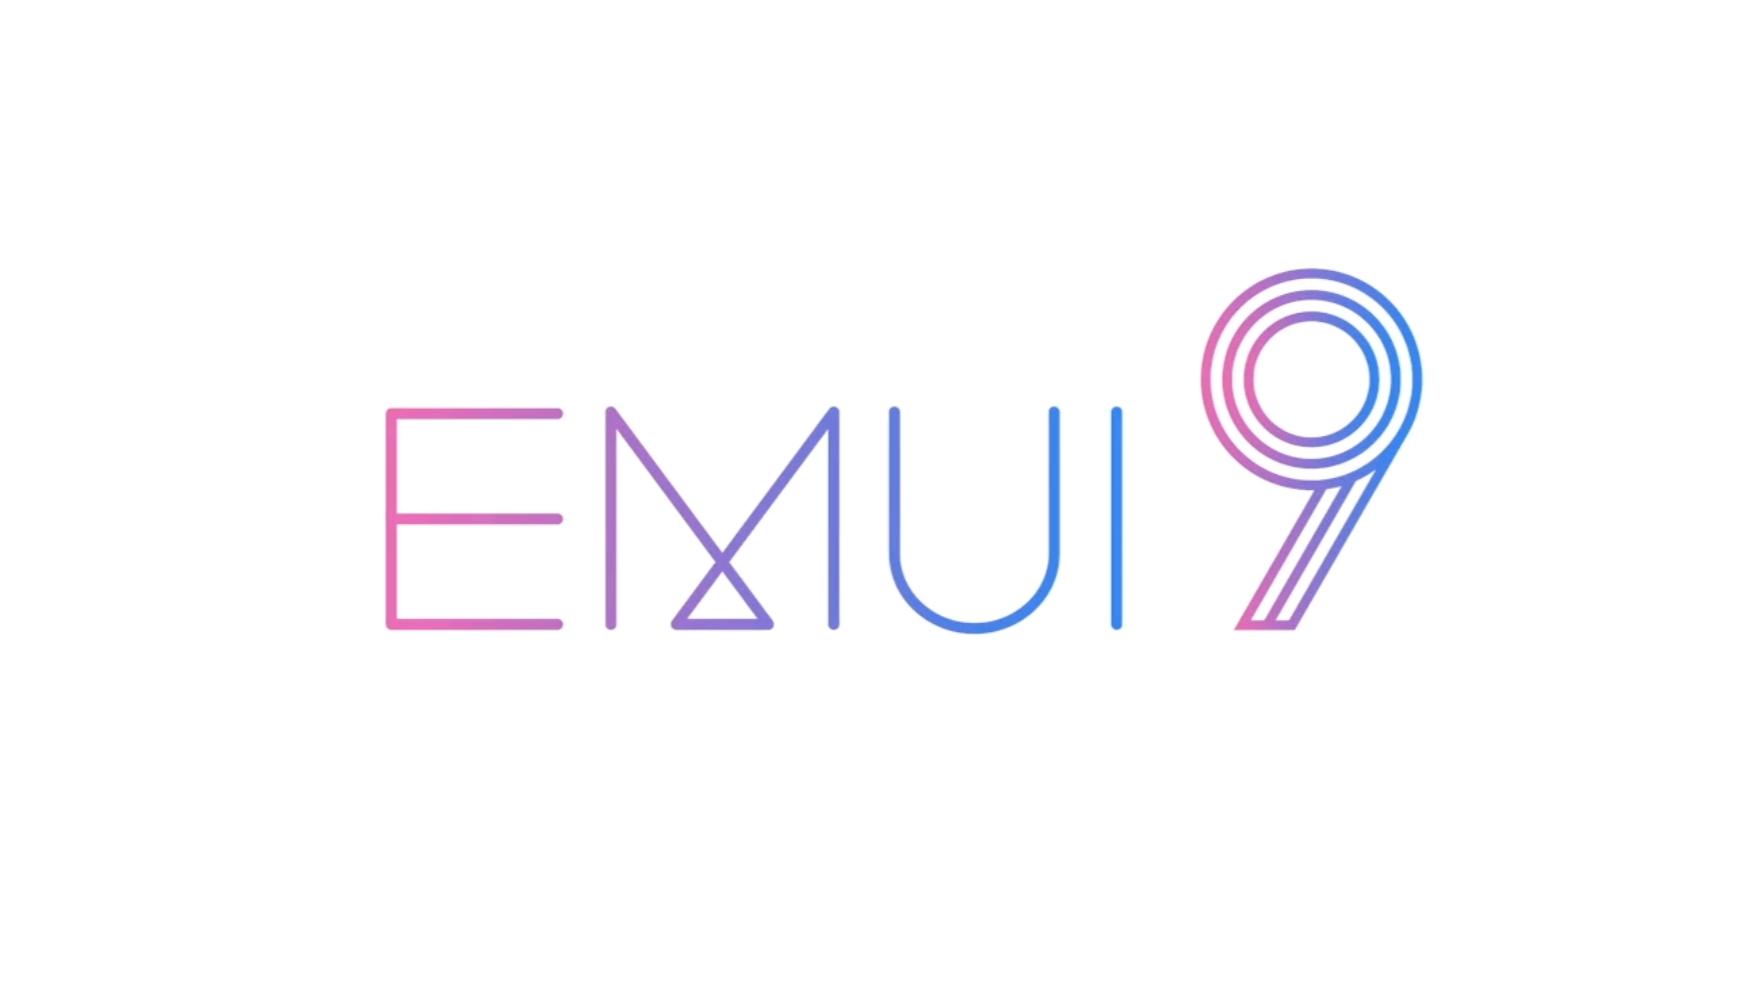 Video: Huawei’s EMUI 9 adds a lot of functionality that’s missing in Android